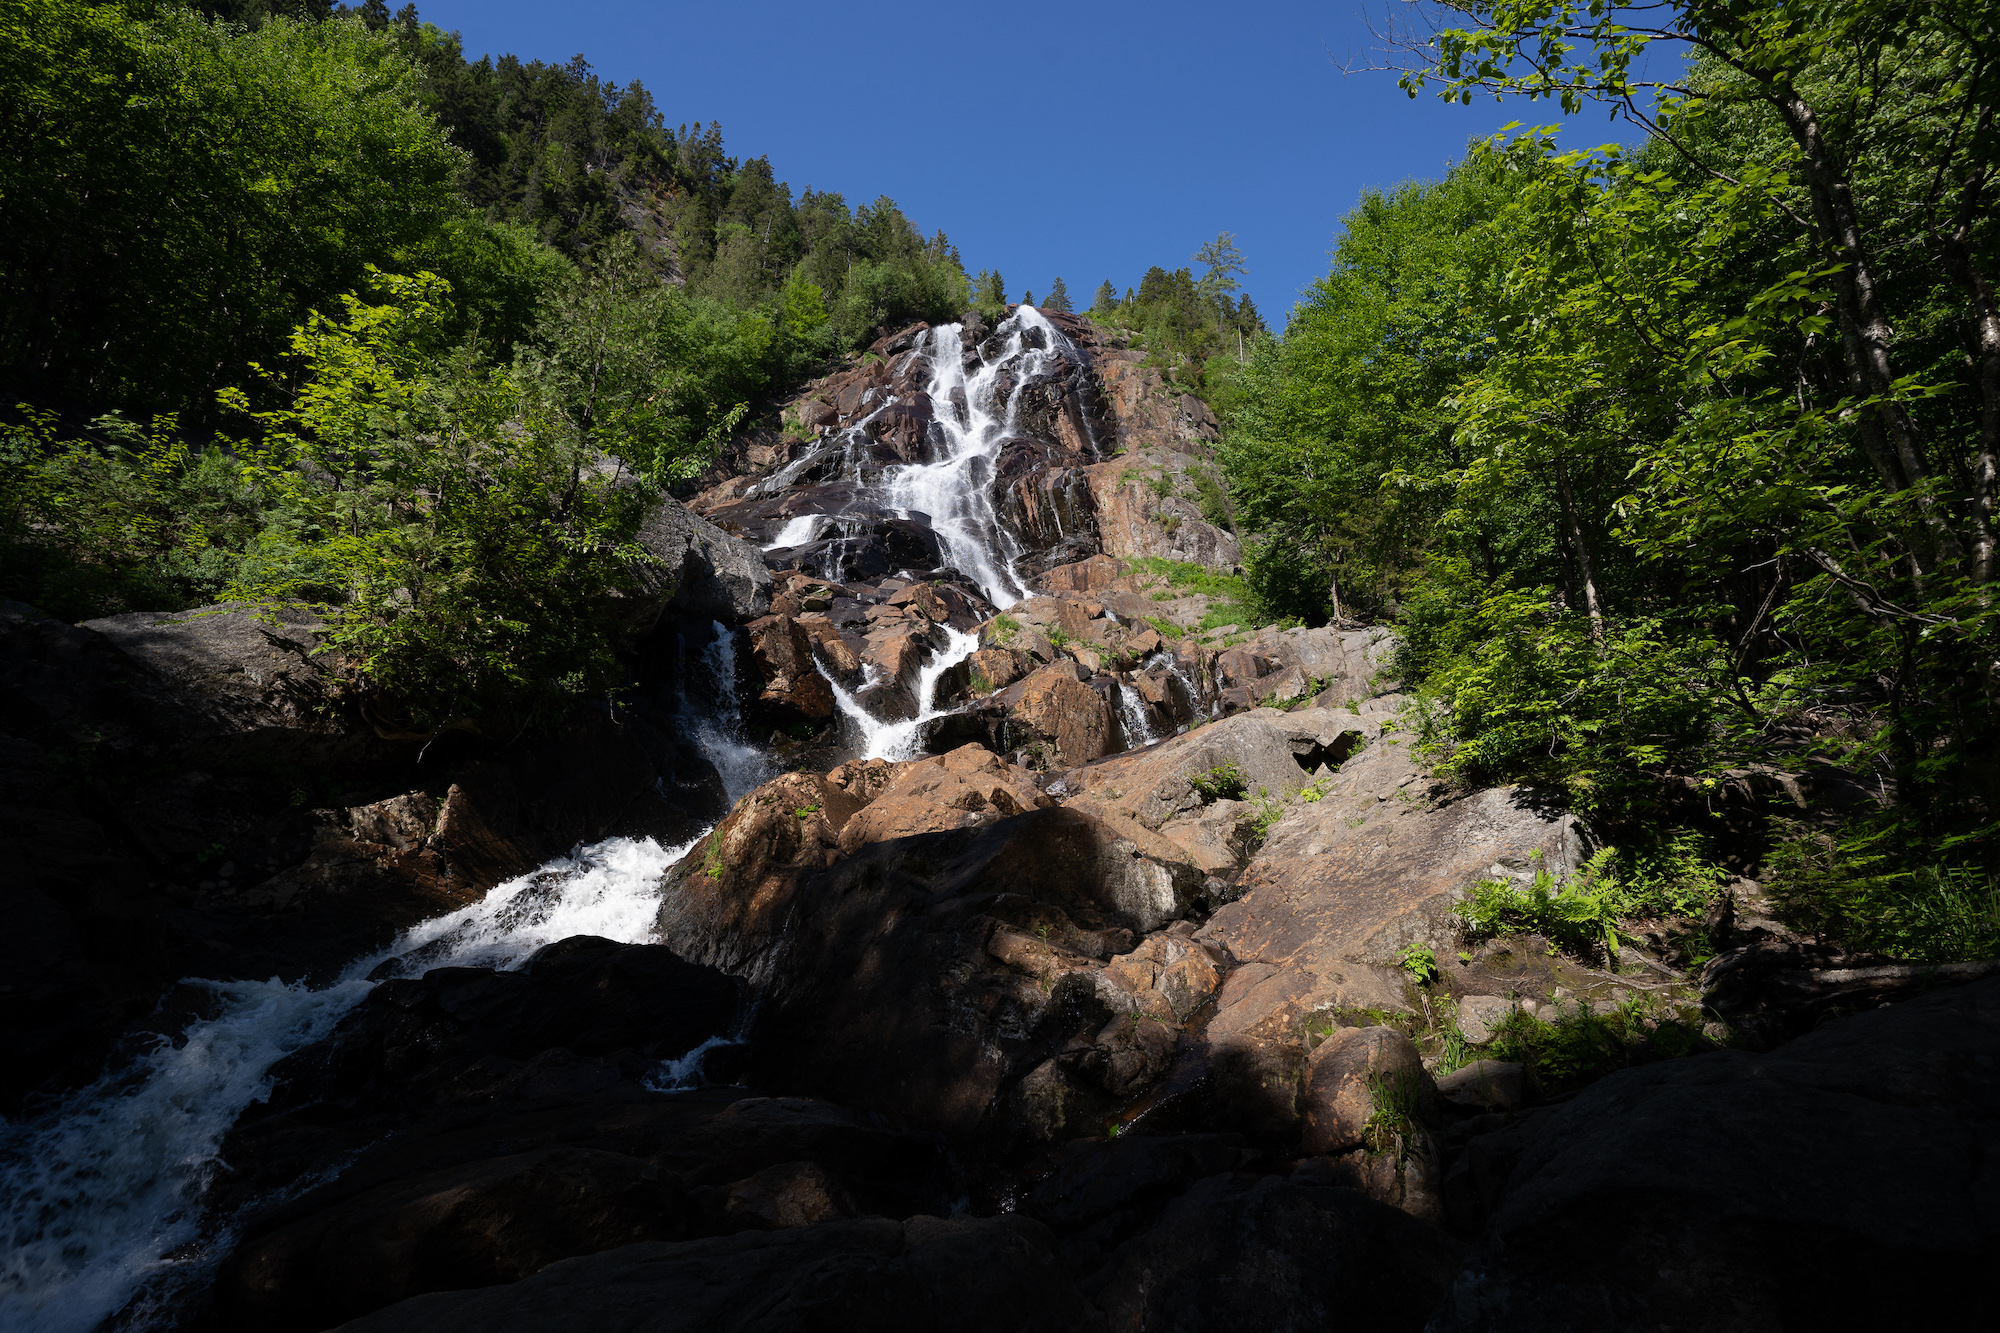 Photo of Delaney Falls, a rock waterfall surrounded by trees and the lush greenery of the Valley, visible from the hiking trails.